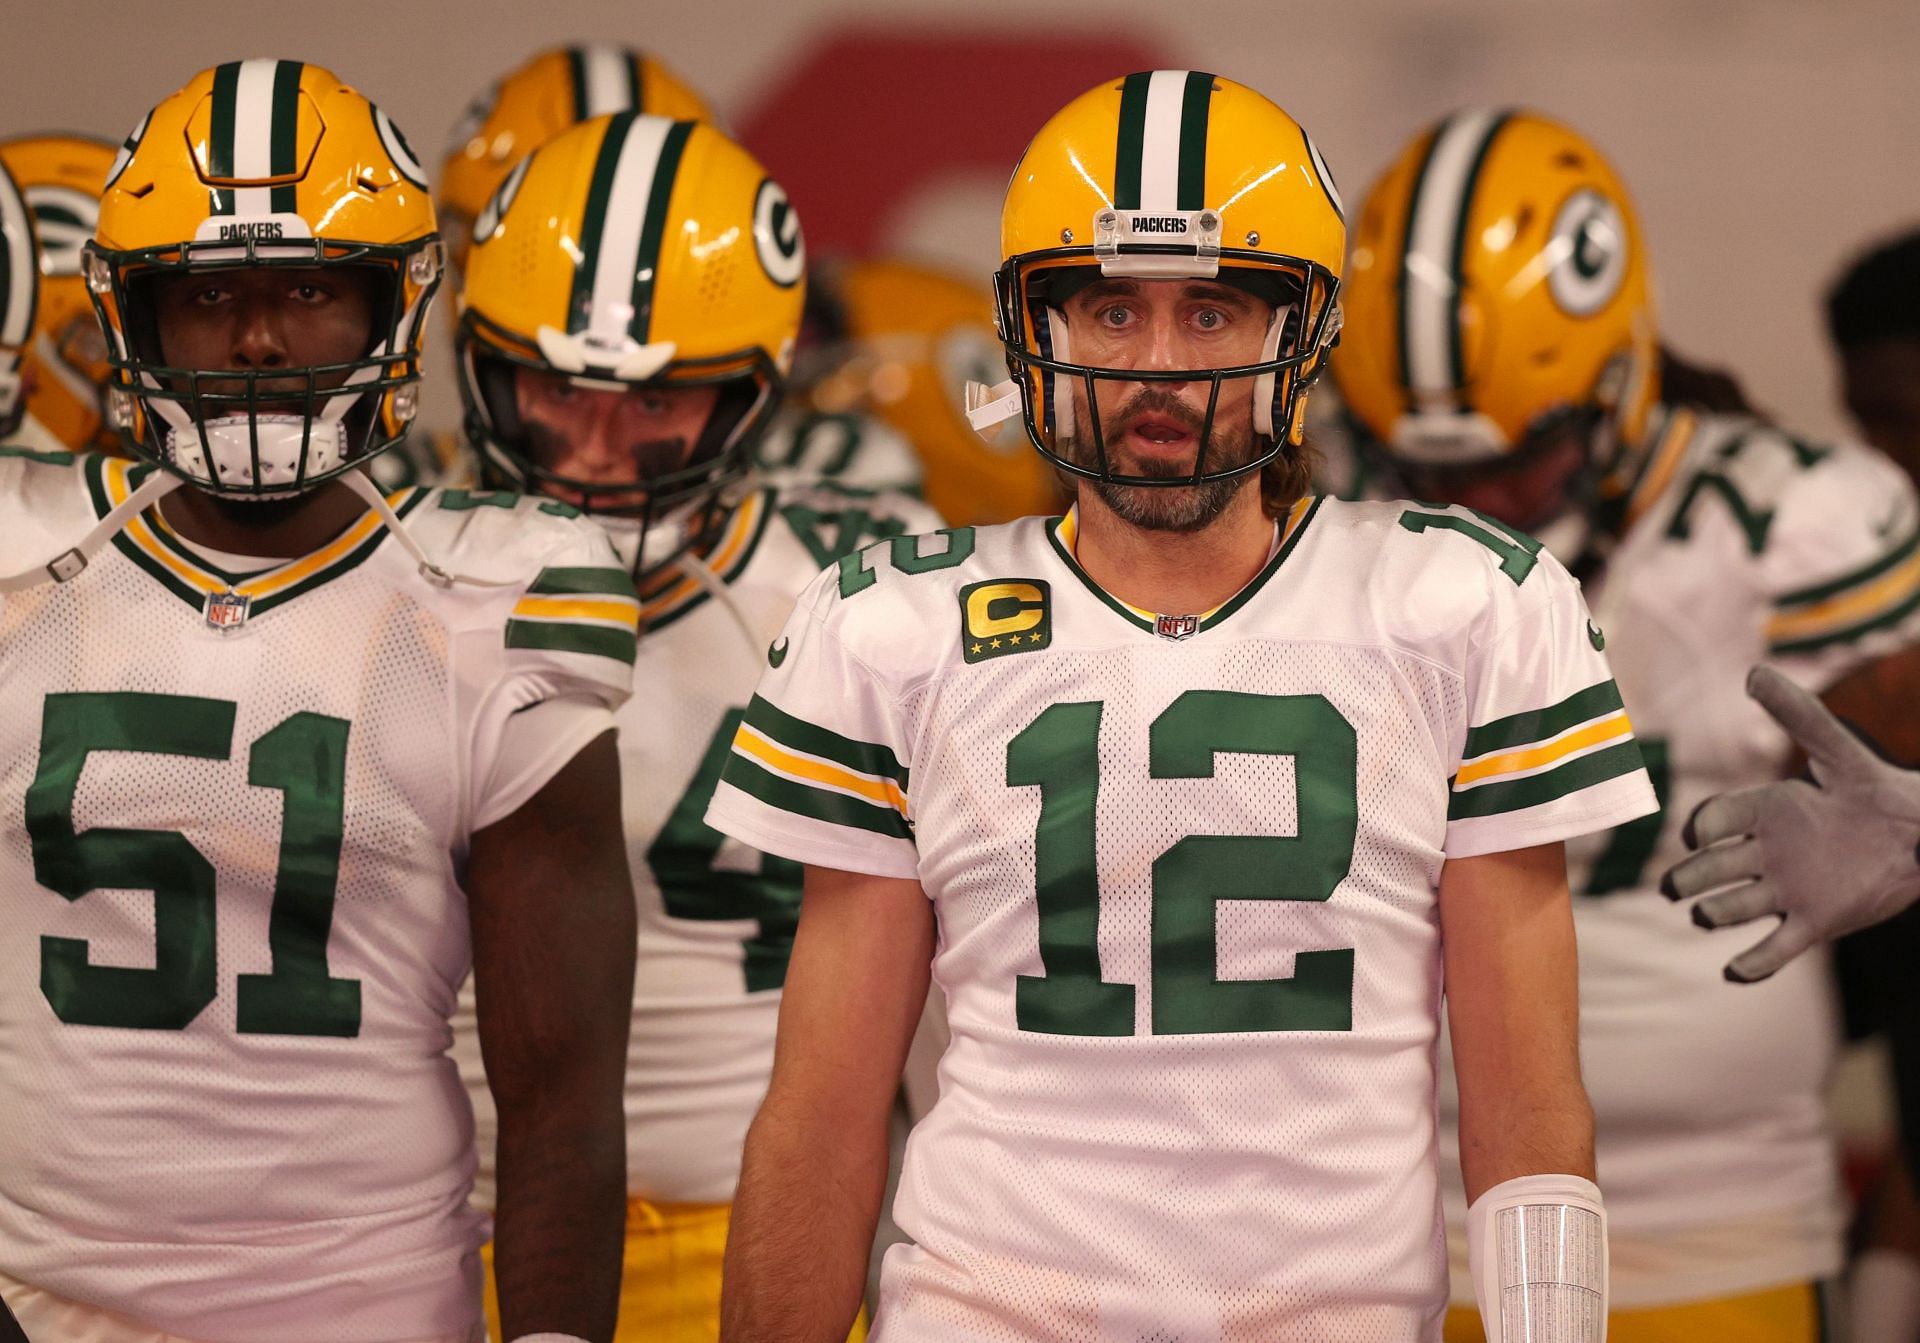 Aaron Rodgers is the team leader in Green Bay Packers